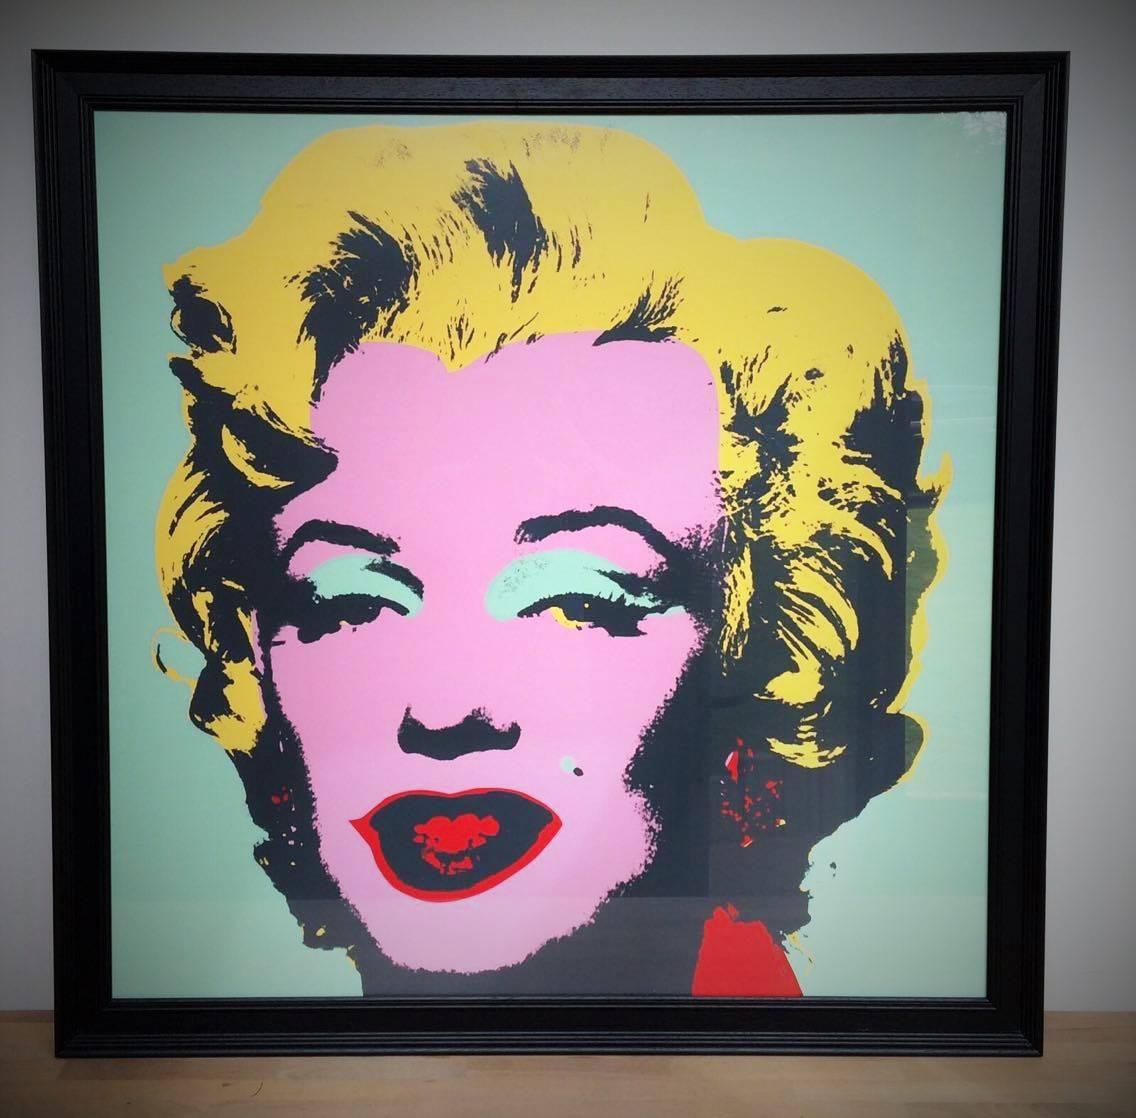 Silk screen printed version of the iconic Marilyn Monroe series.​
​
This example is published by Sunday B. Morning.
​
The print is framed and has a dimension of 100 x 100cm.
​ 
Blue ink version​
​
The color mix gives this piece it's lively